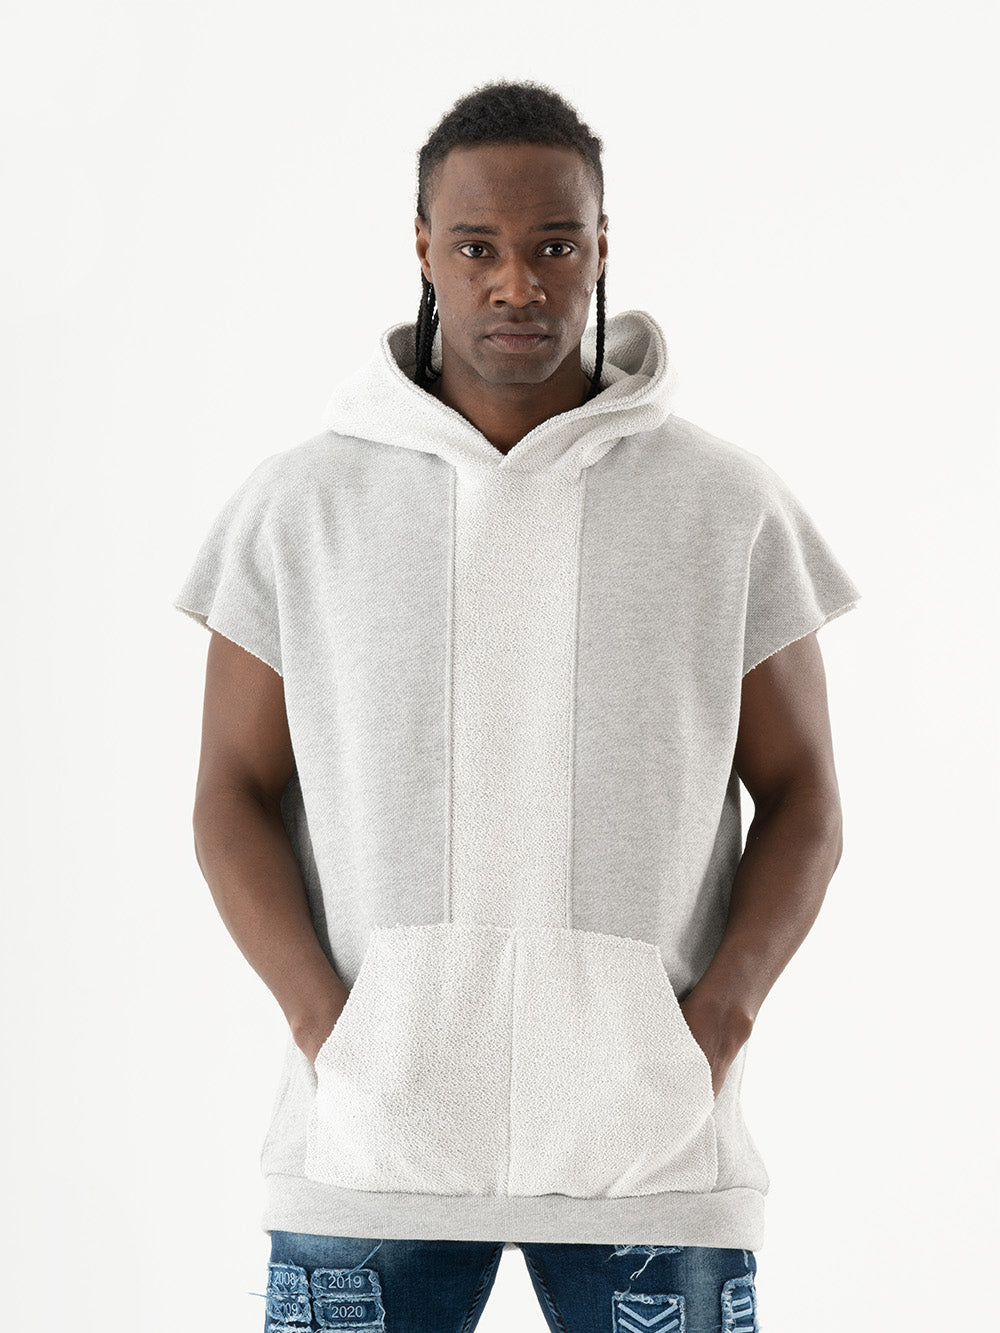 A man wearing a BACHELOR HOODIE | WHITE with a pouch pocket.